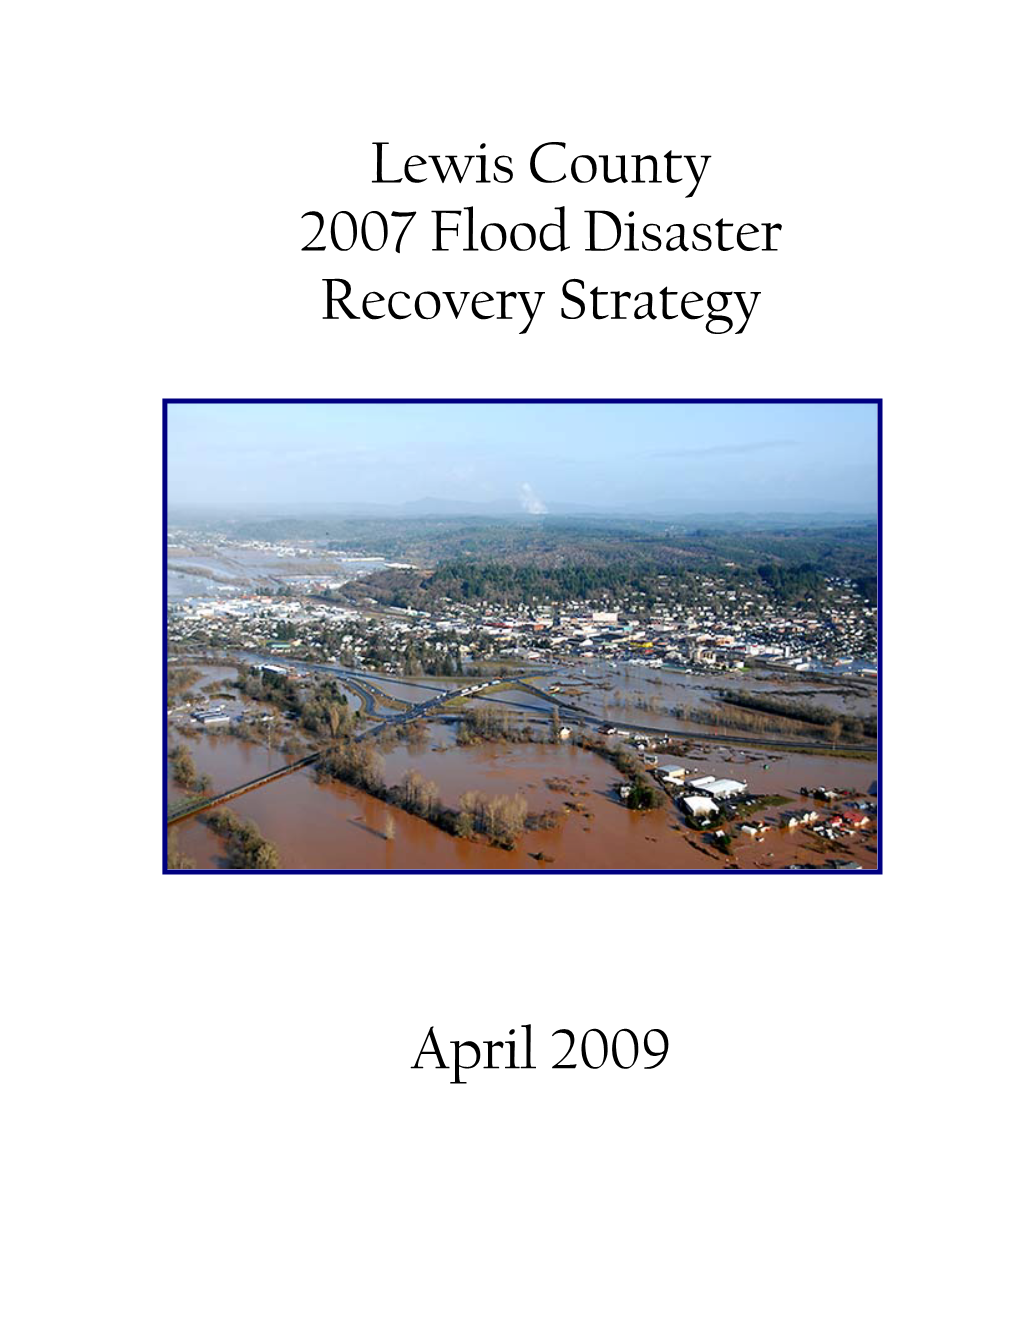 Lewis County 2007 Flood Disaster Recovery Strategy